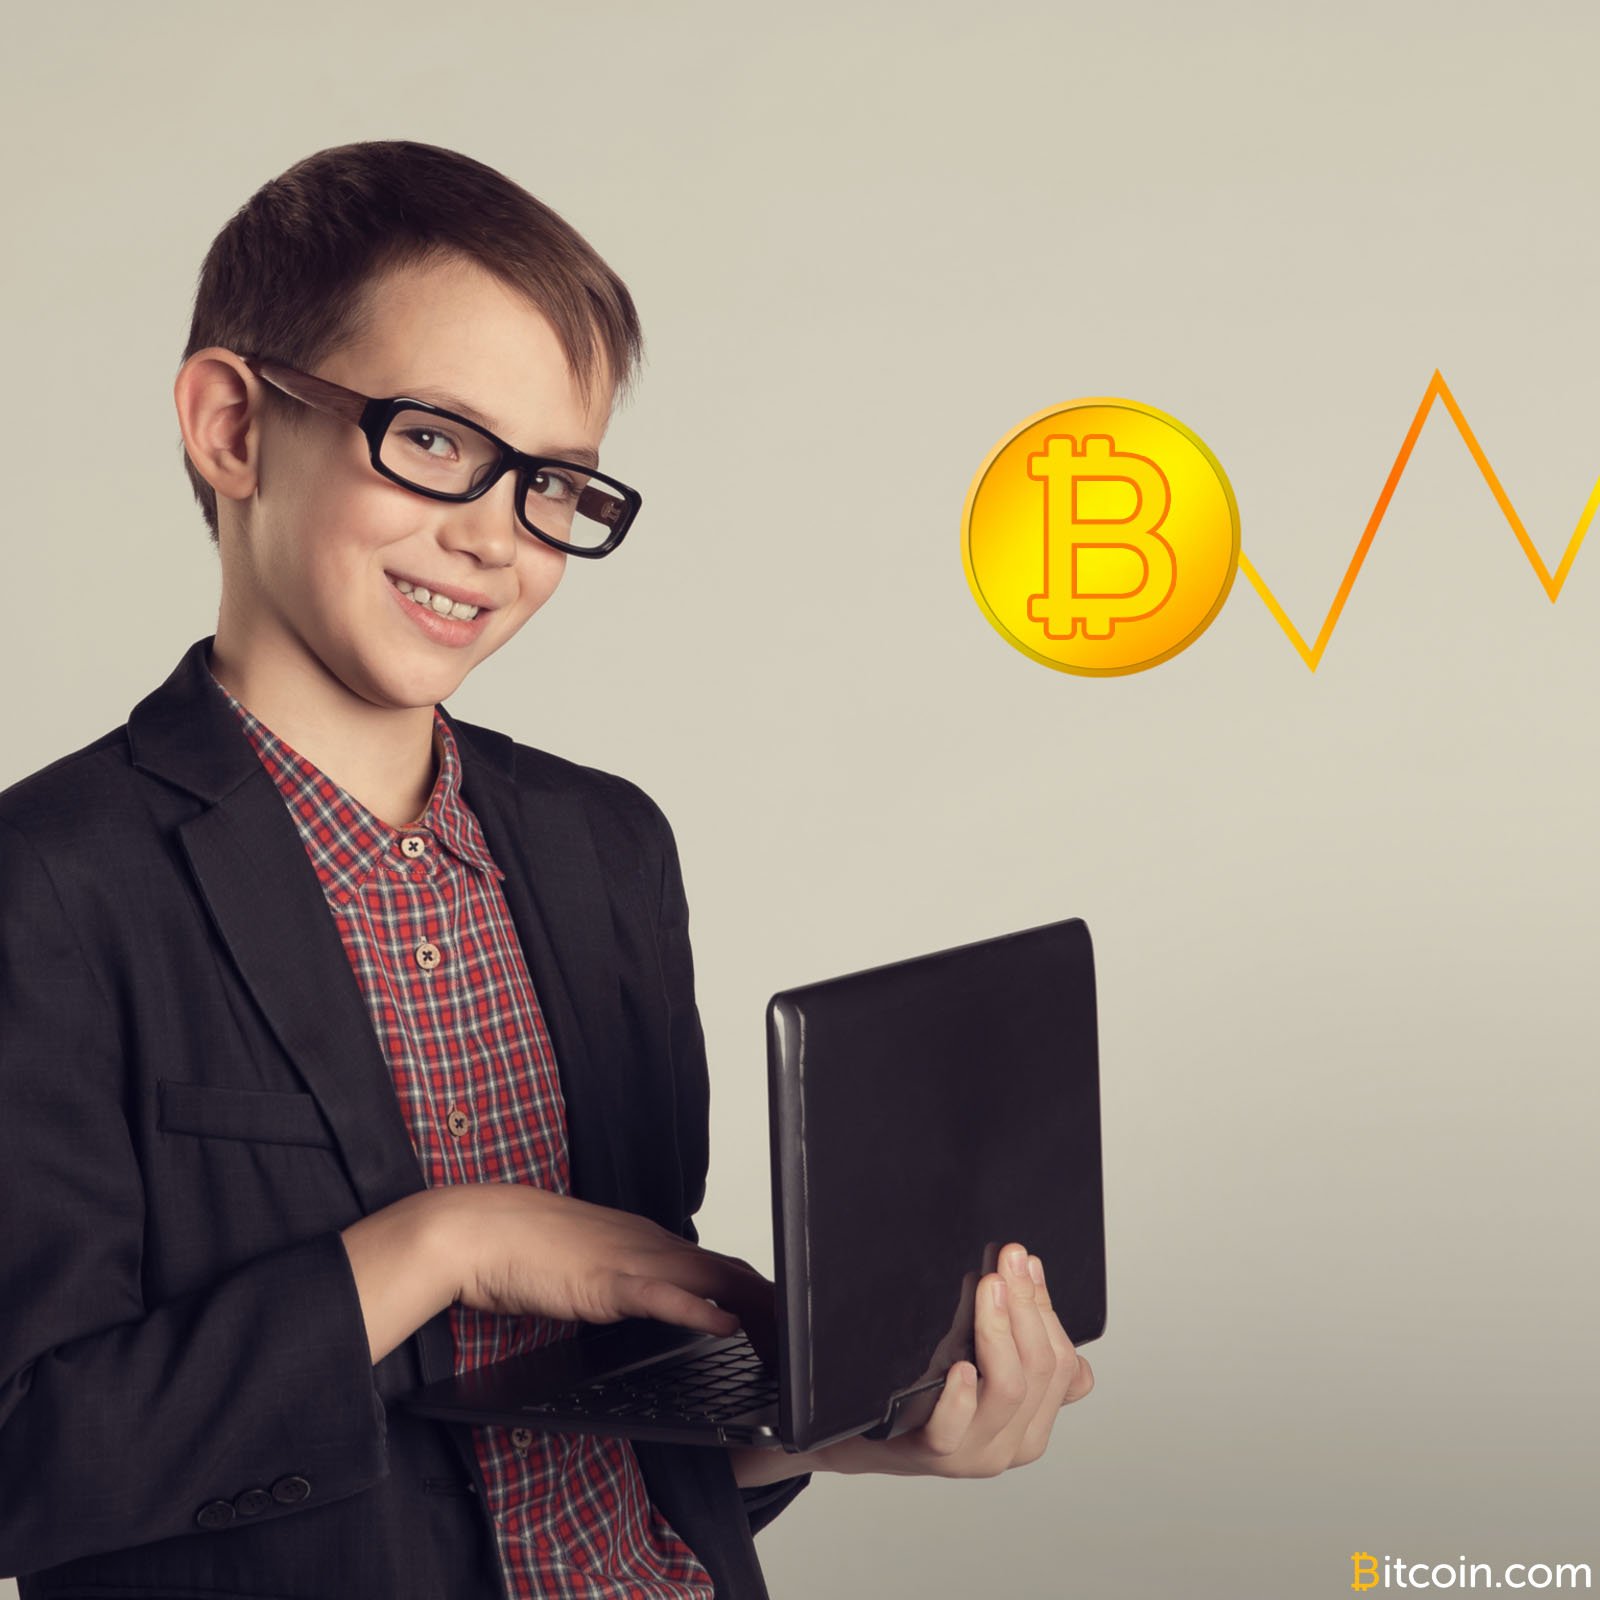 Younger Americans See Bitcoin As Investment Opportunity, Survey Says